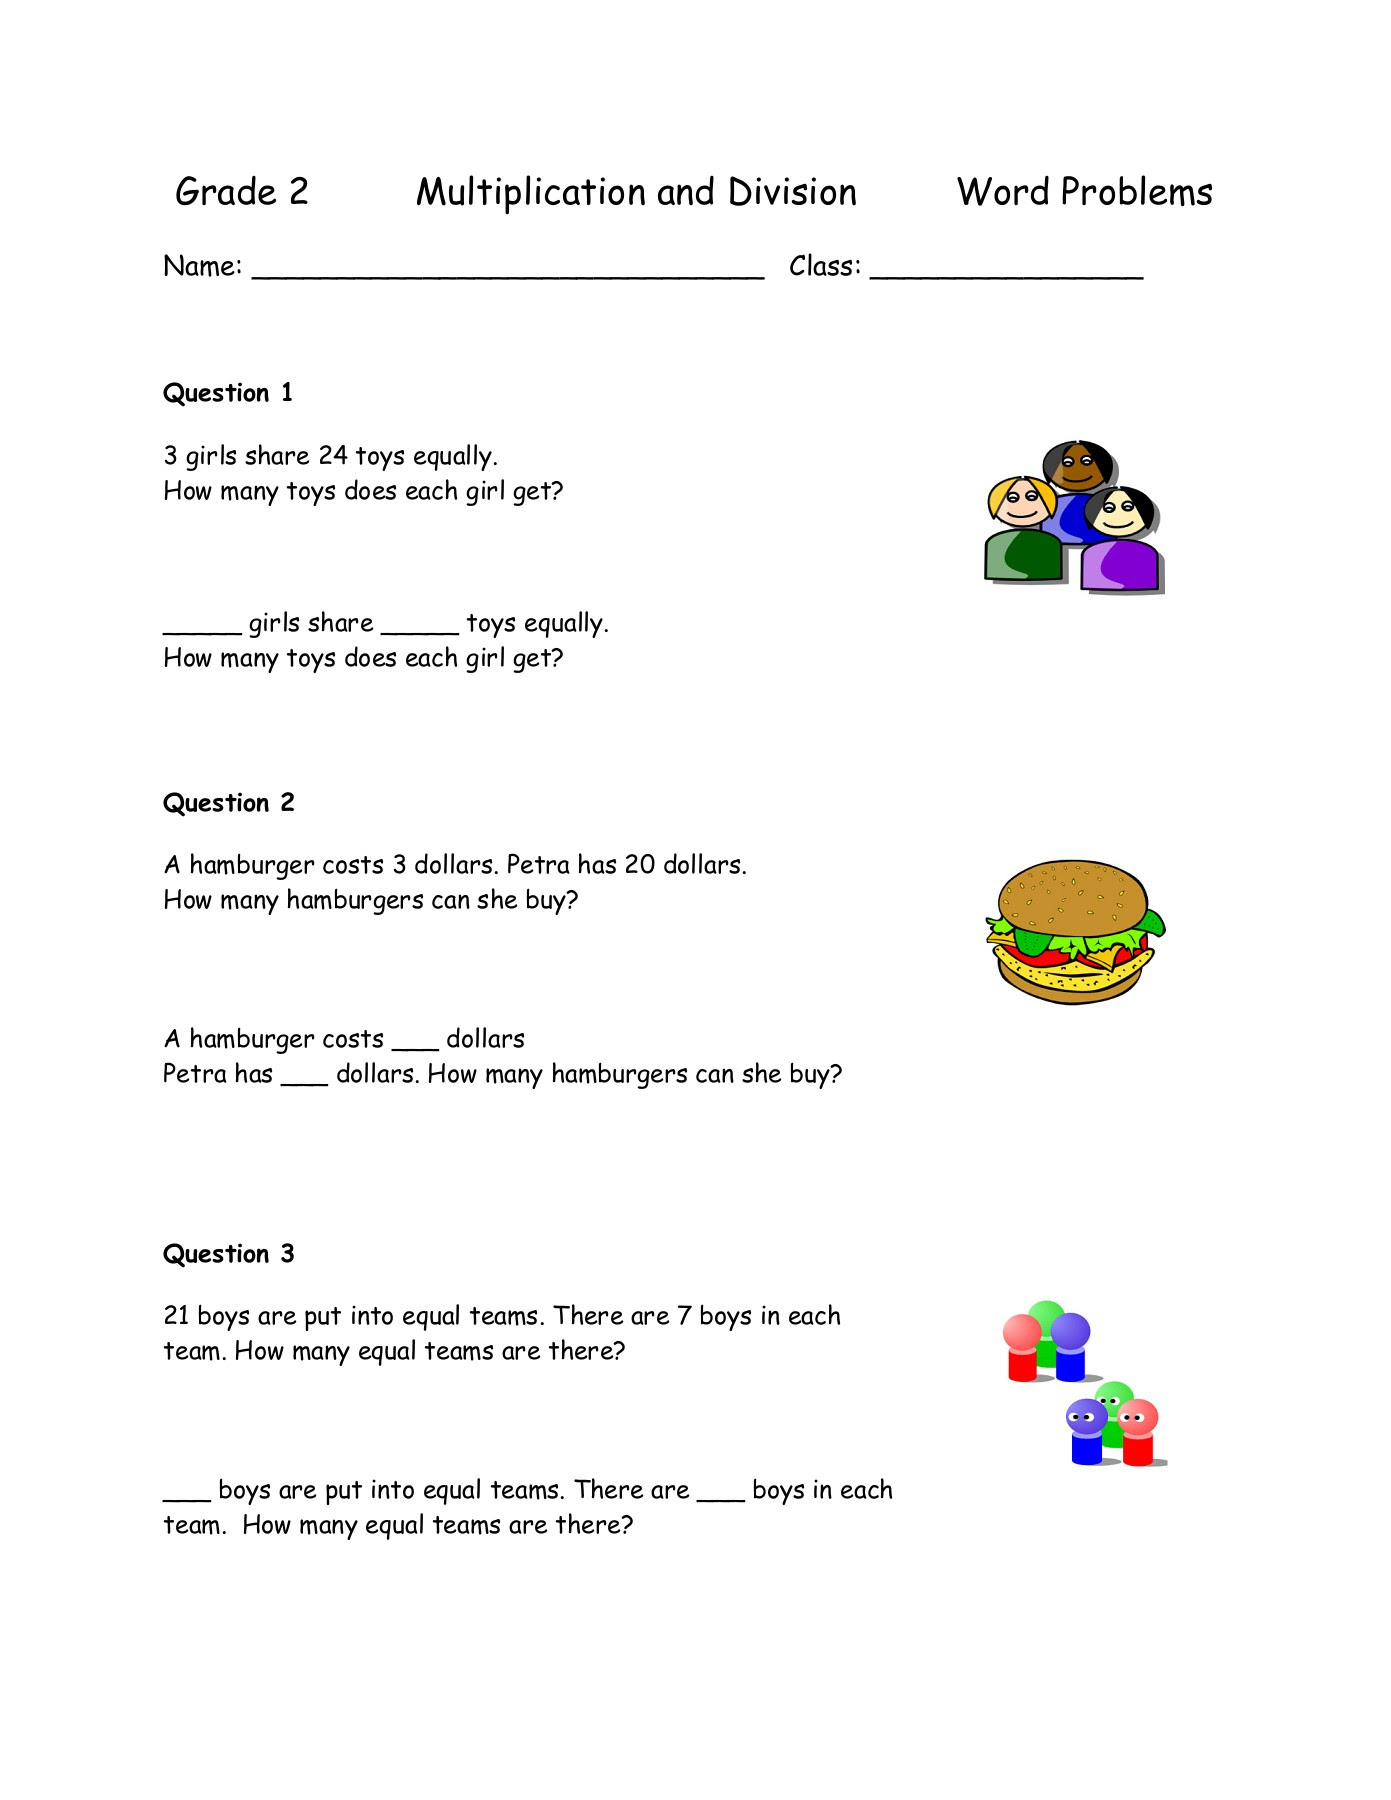 multiplication-and-division-word-problems-grade-2-3rd-grade-two-step-word-problems-with